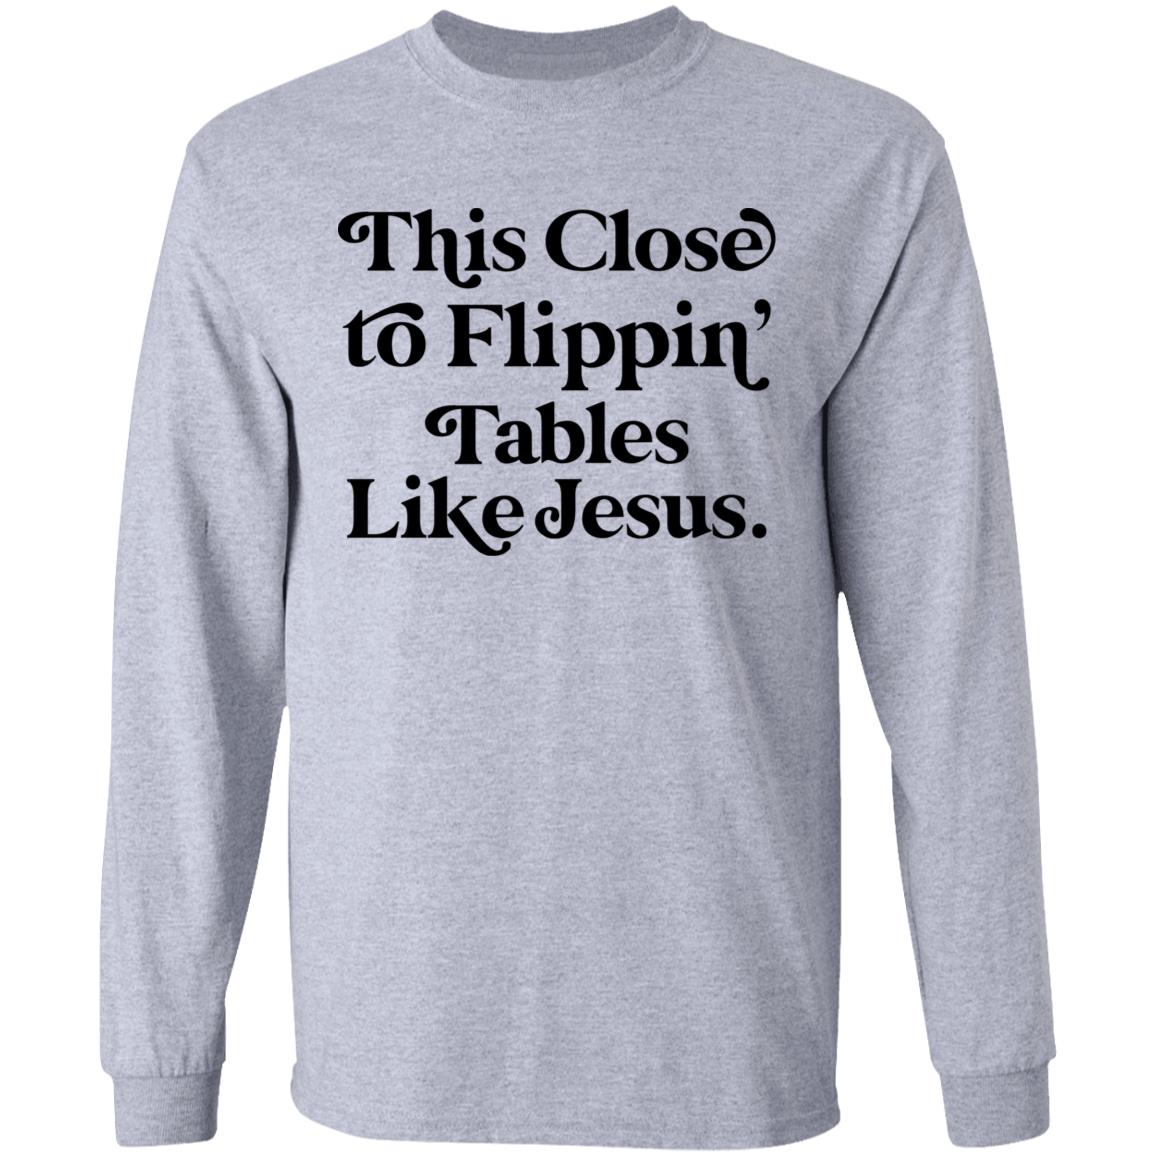 Unisex Tee This Close to Flippin' Tables Like Jesus Tee Gift For Friends Funny Shirt High Material Top&Tee